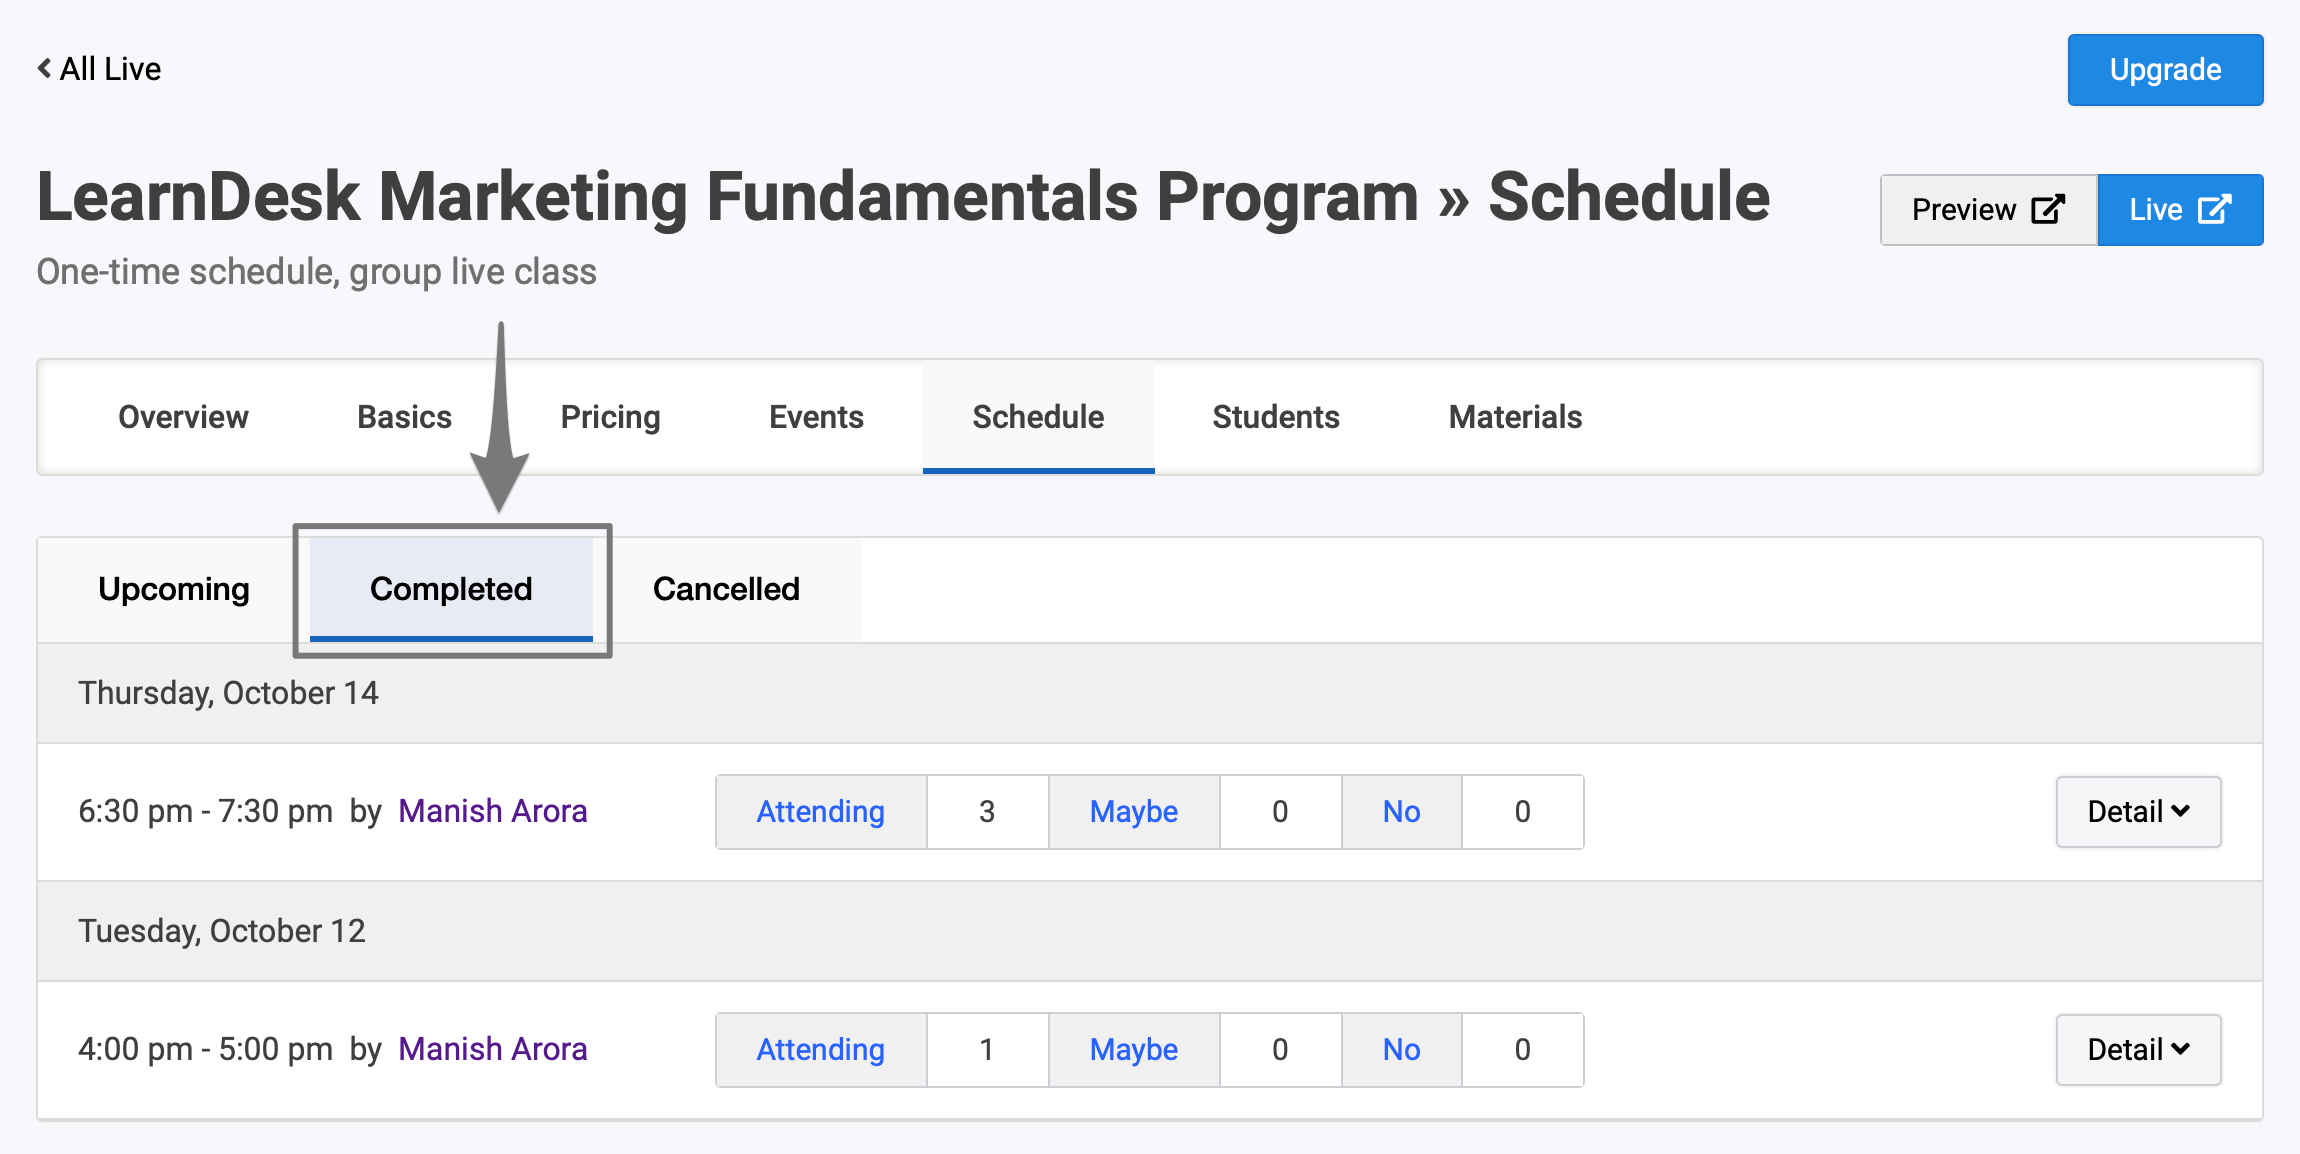 schedule_onetime_events_completed_details.png